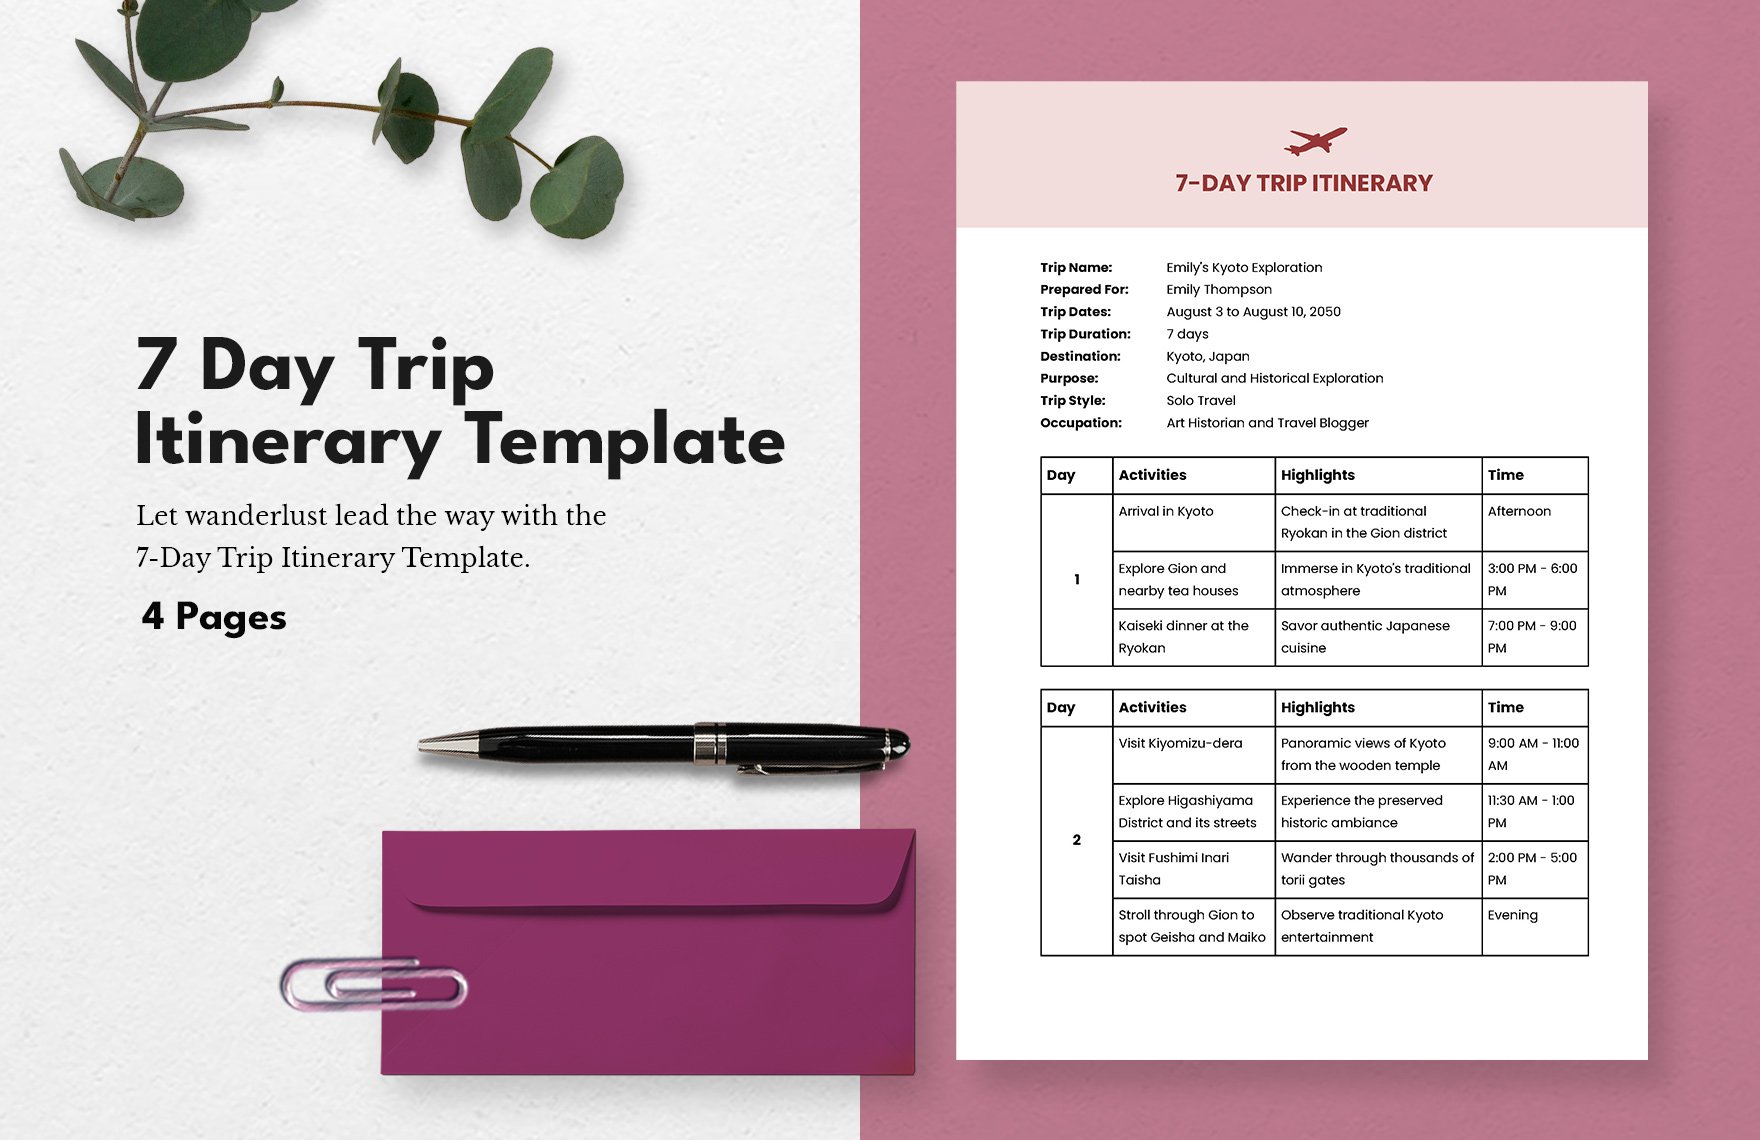 7 Day Trip Itinerary Template in Word, Google Docs, PDF, Apple Pages